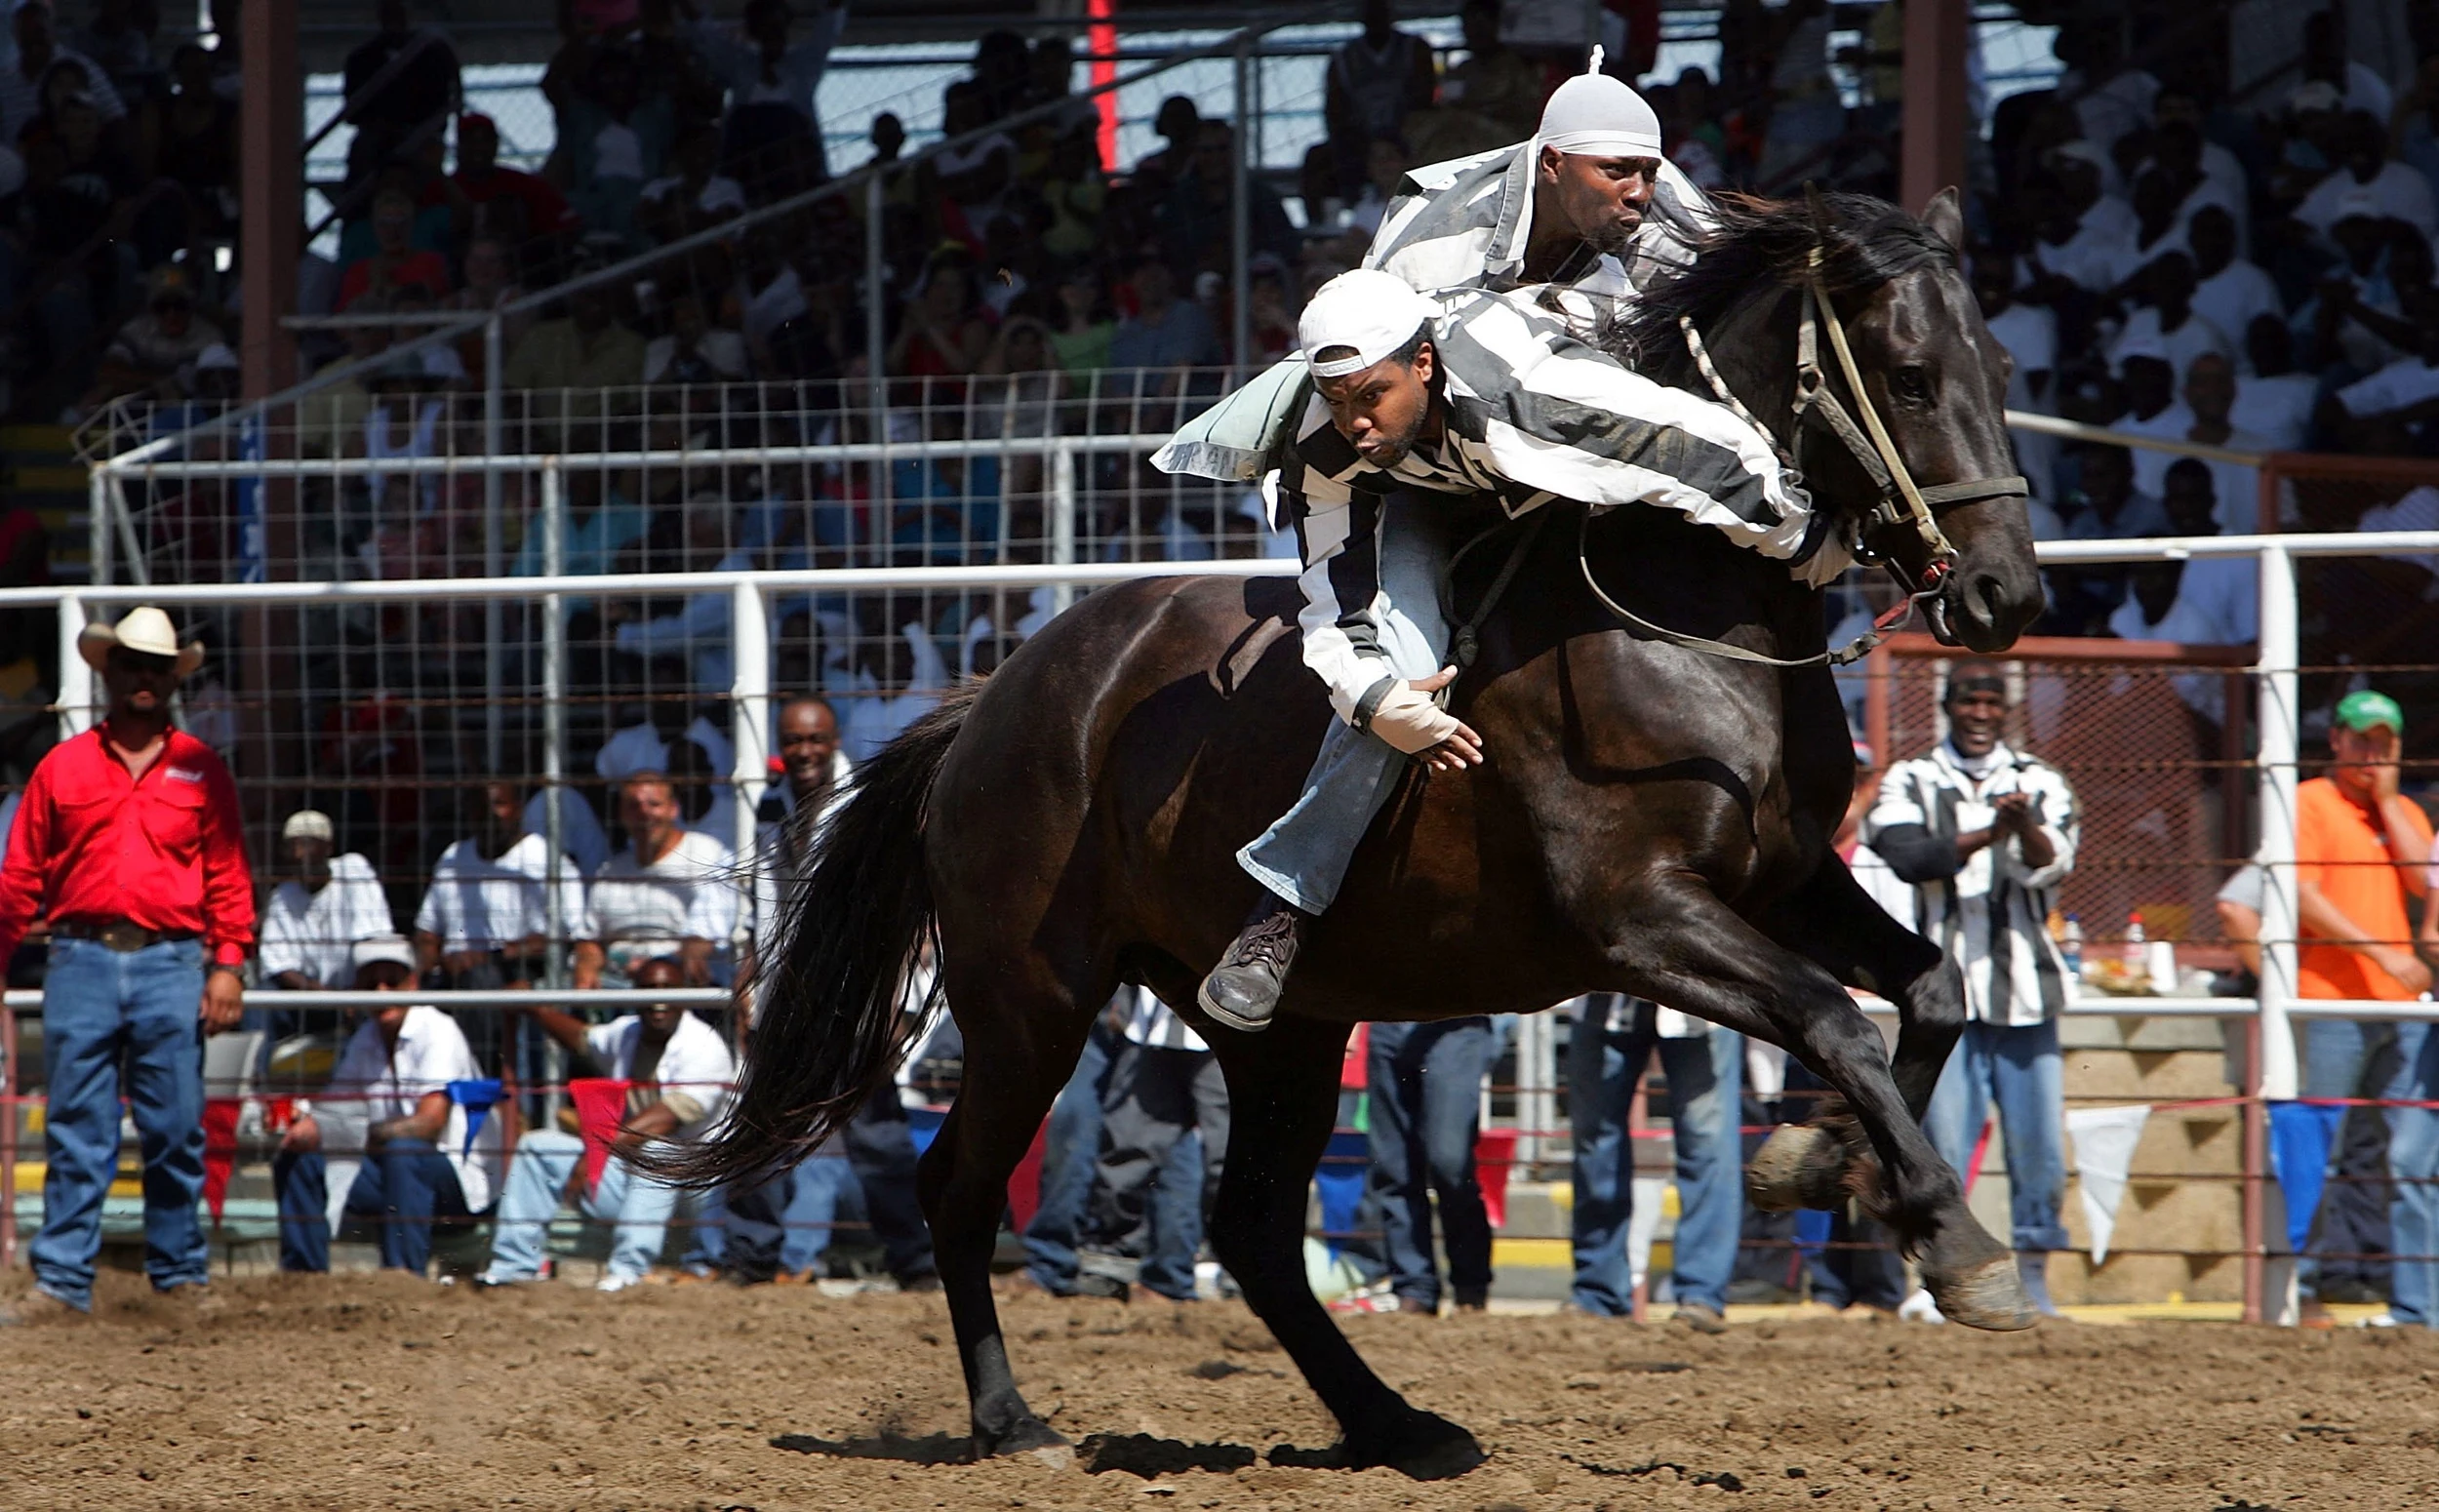 Annual Angola Prison Rodeo Turns Inmates Into Cowboys